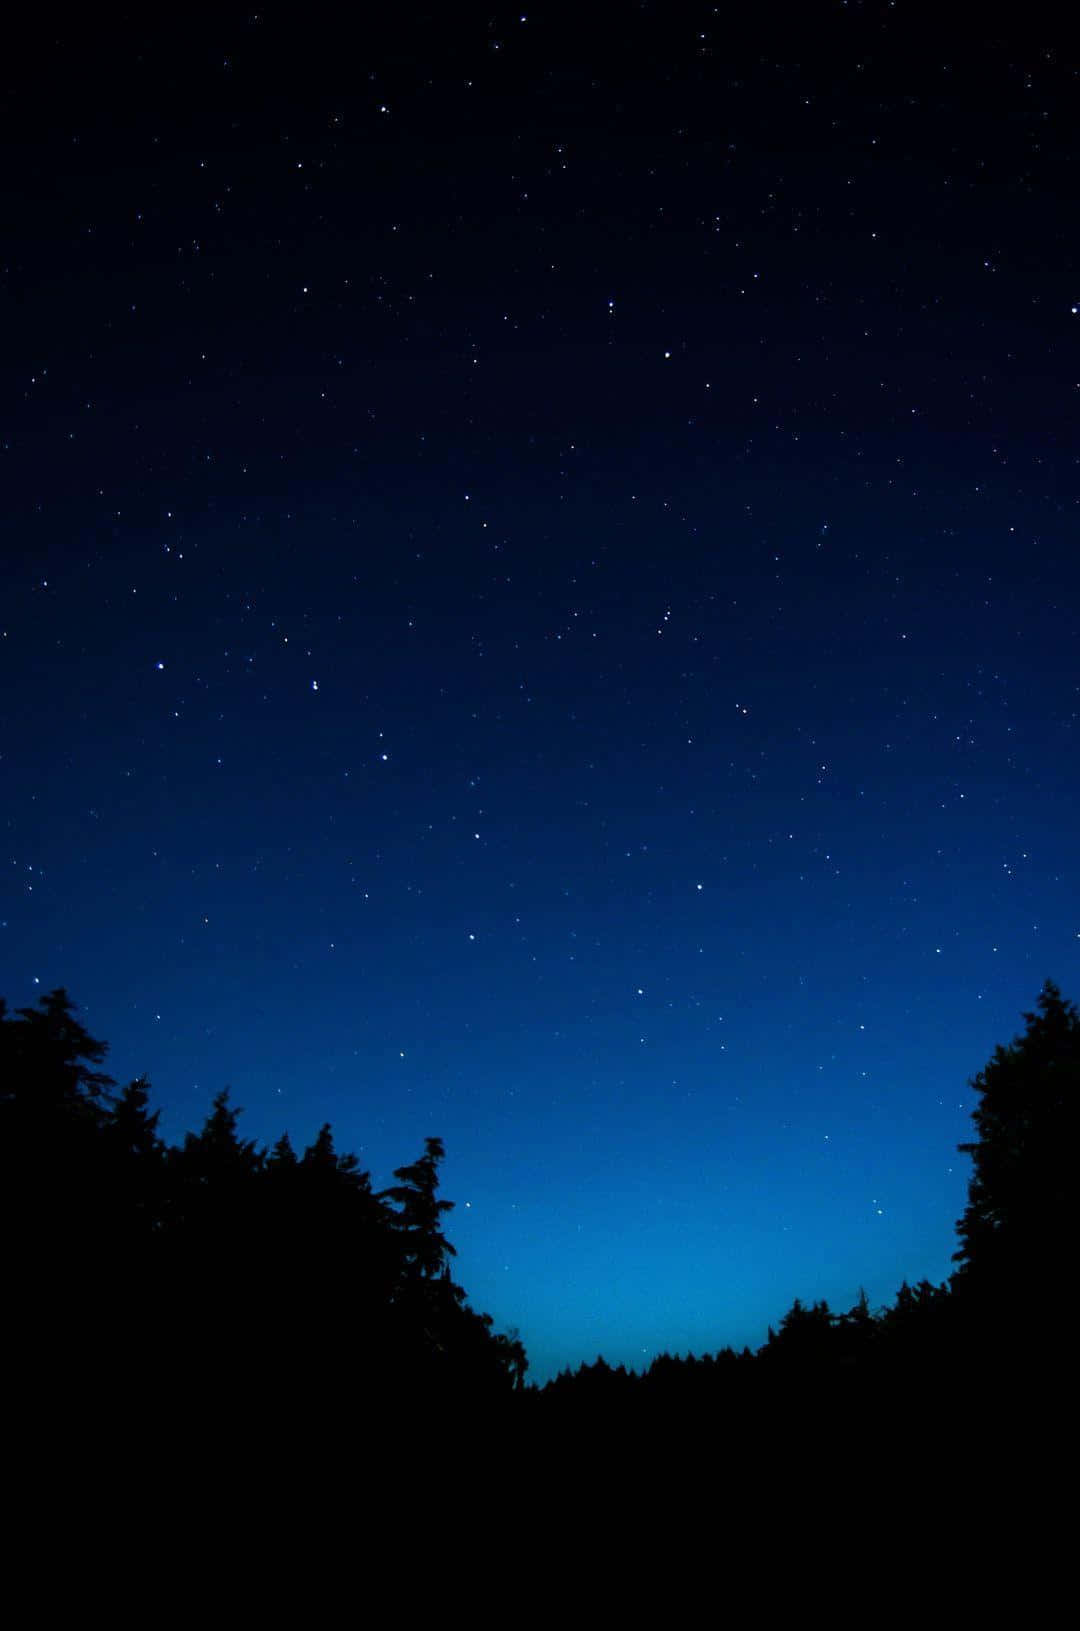 A Night Sky With Stars And Trees Wallpaper